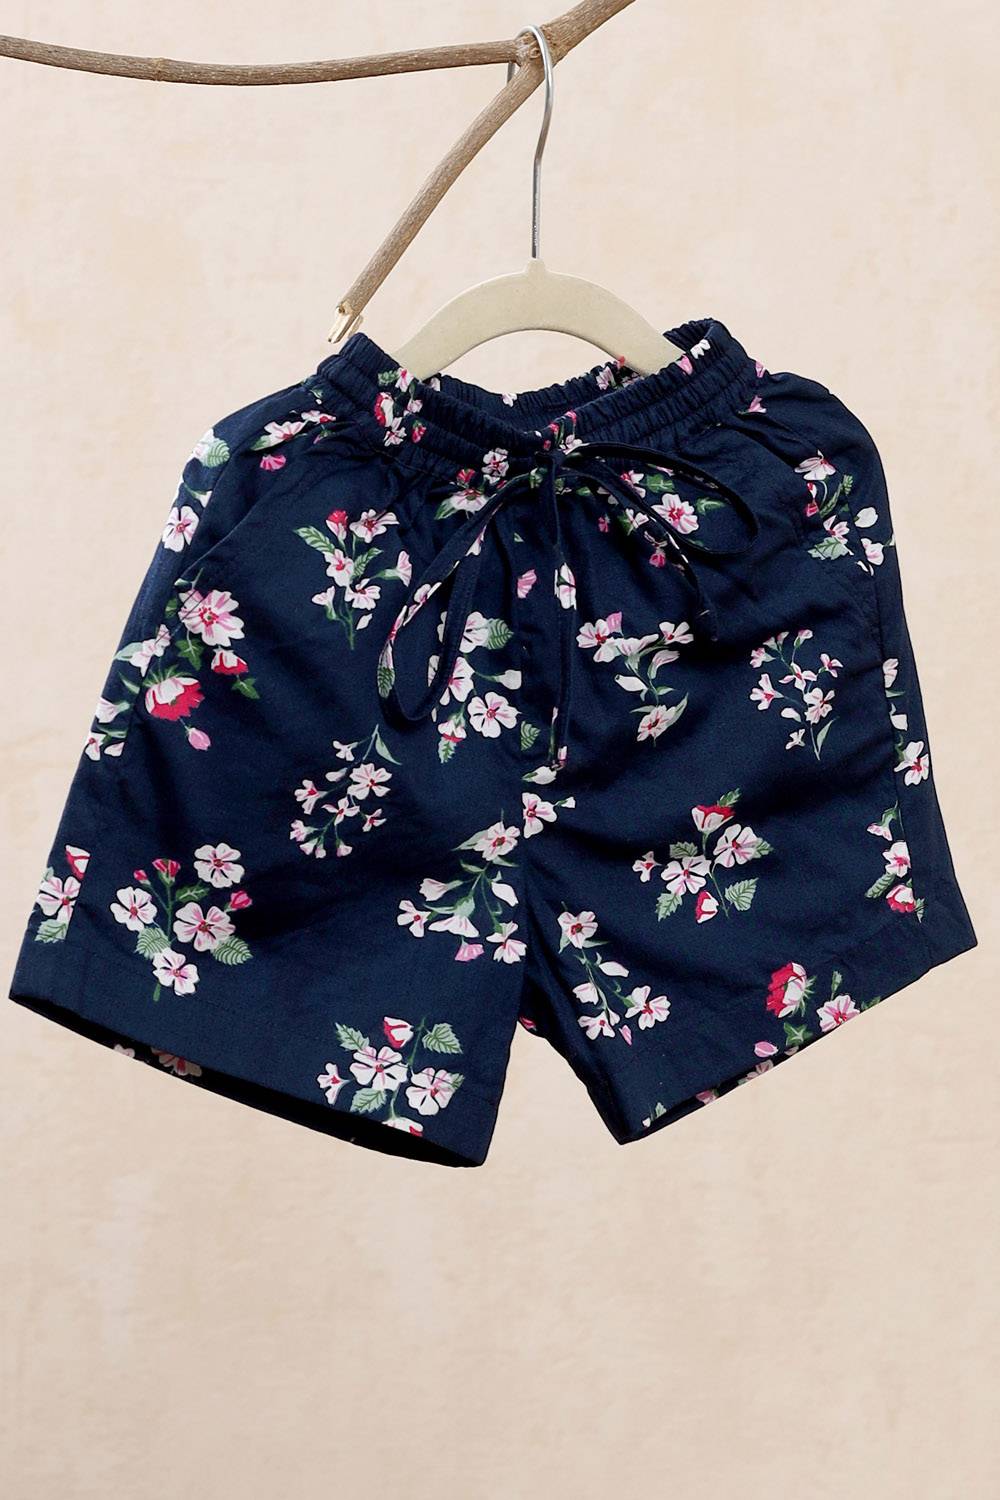 Blooming Buds Blue Floral Shorts